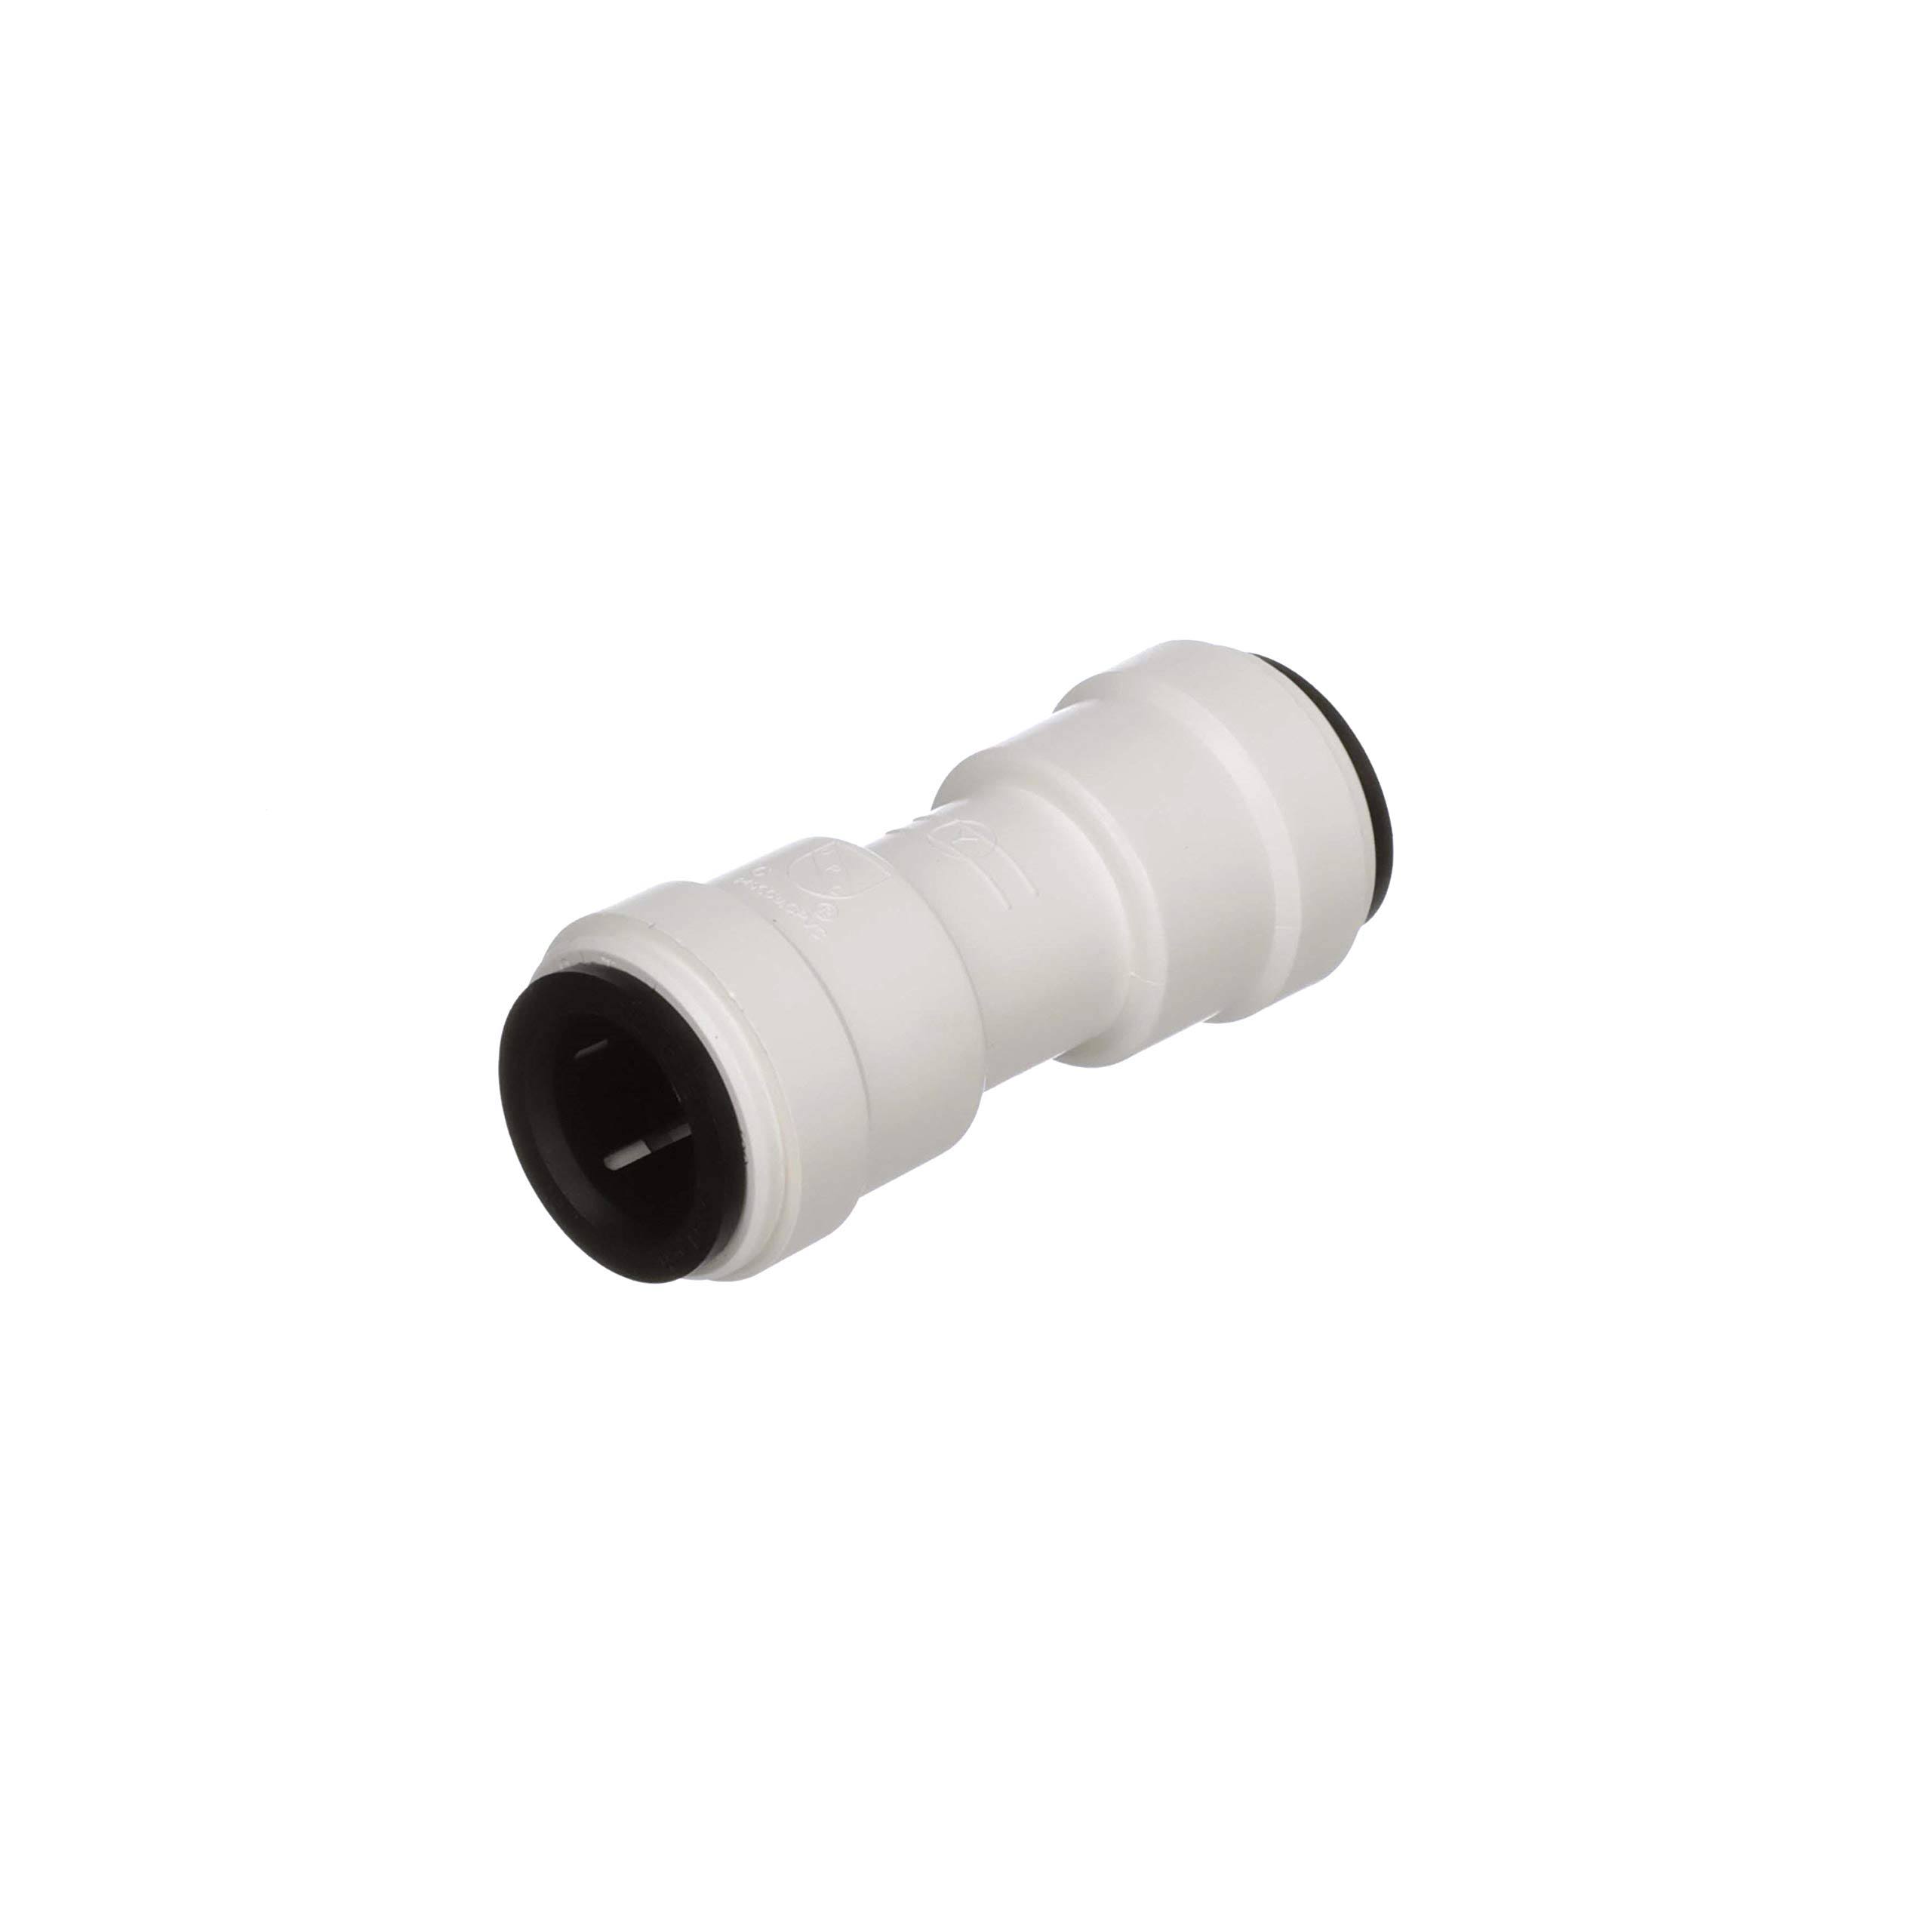 Watts P-600 Quick Connect Coupling - 1/2" CTS